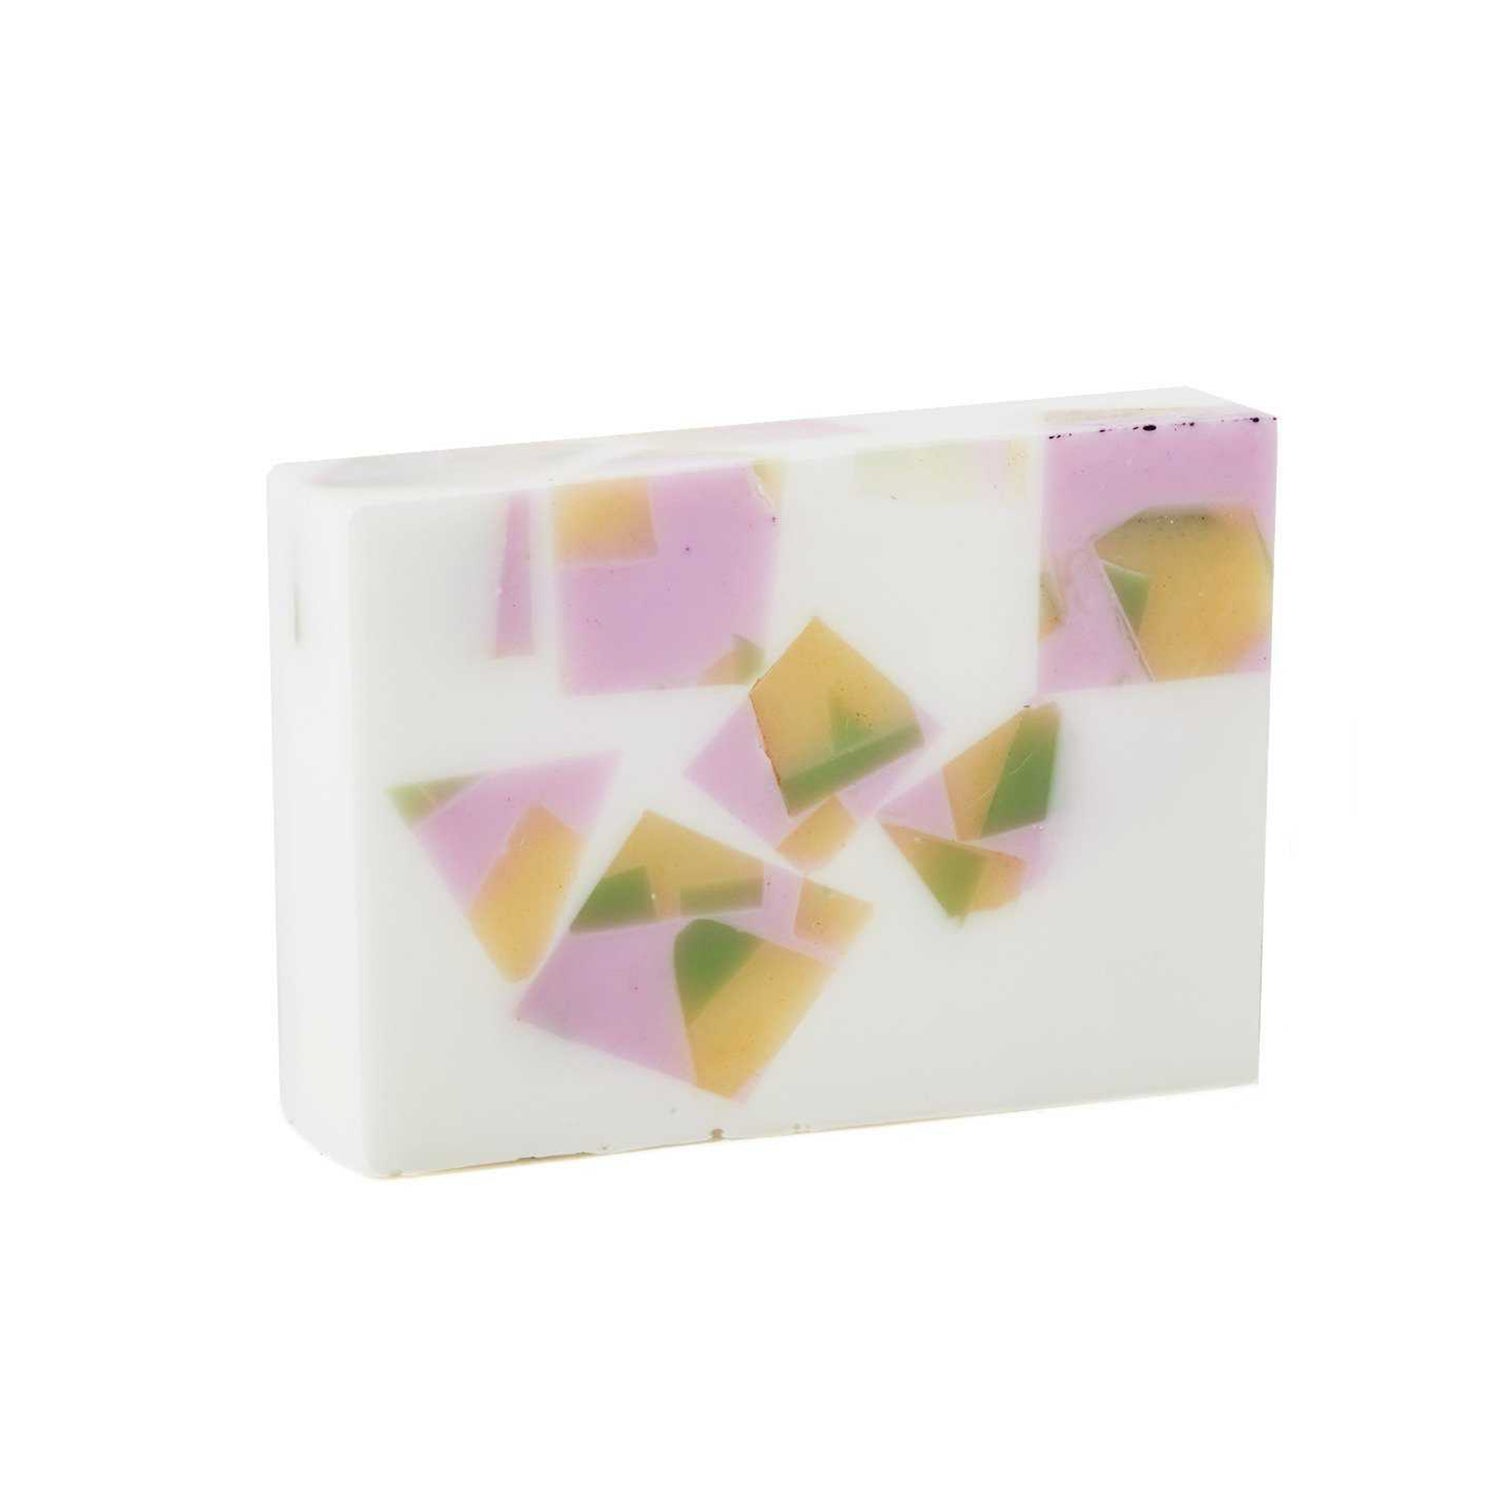 White rectangle soap bar with overlapping blocks of colour in lilac, yellow, and green